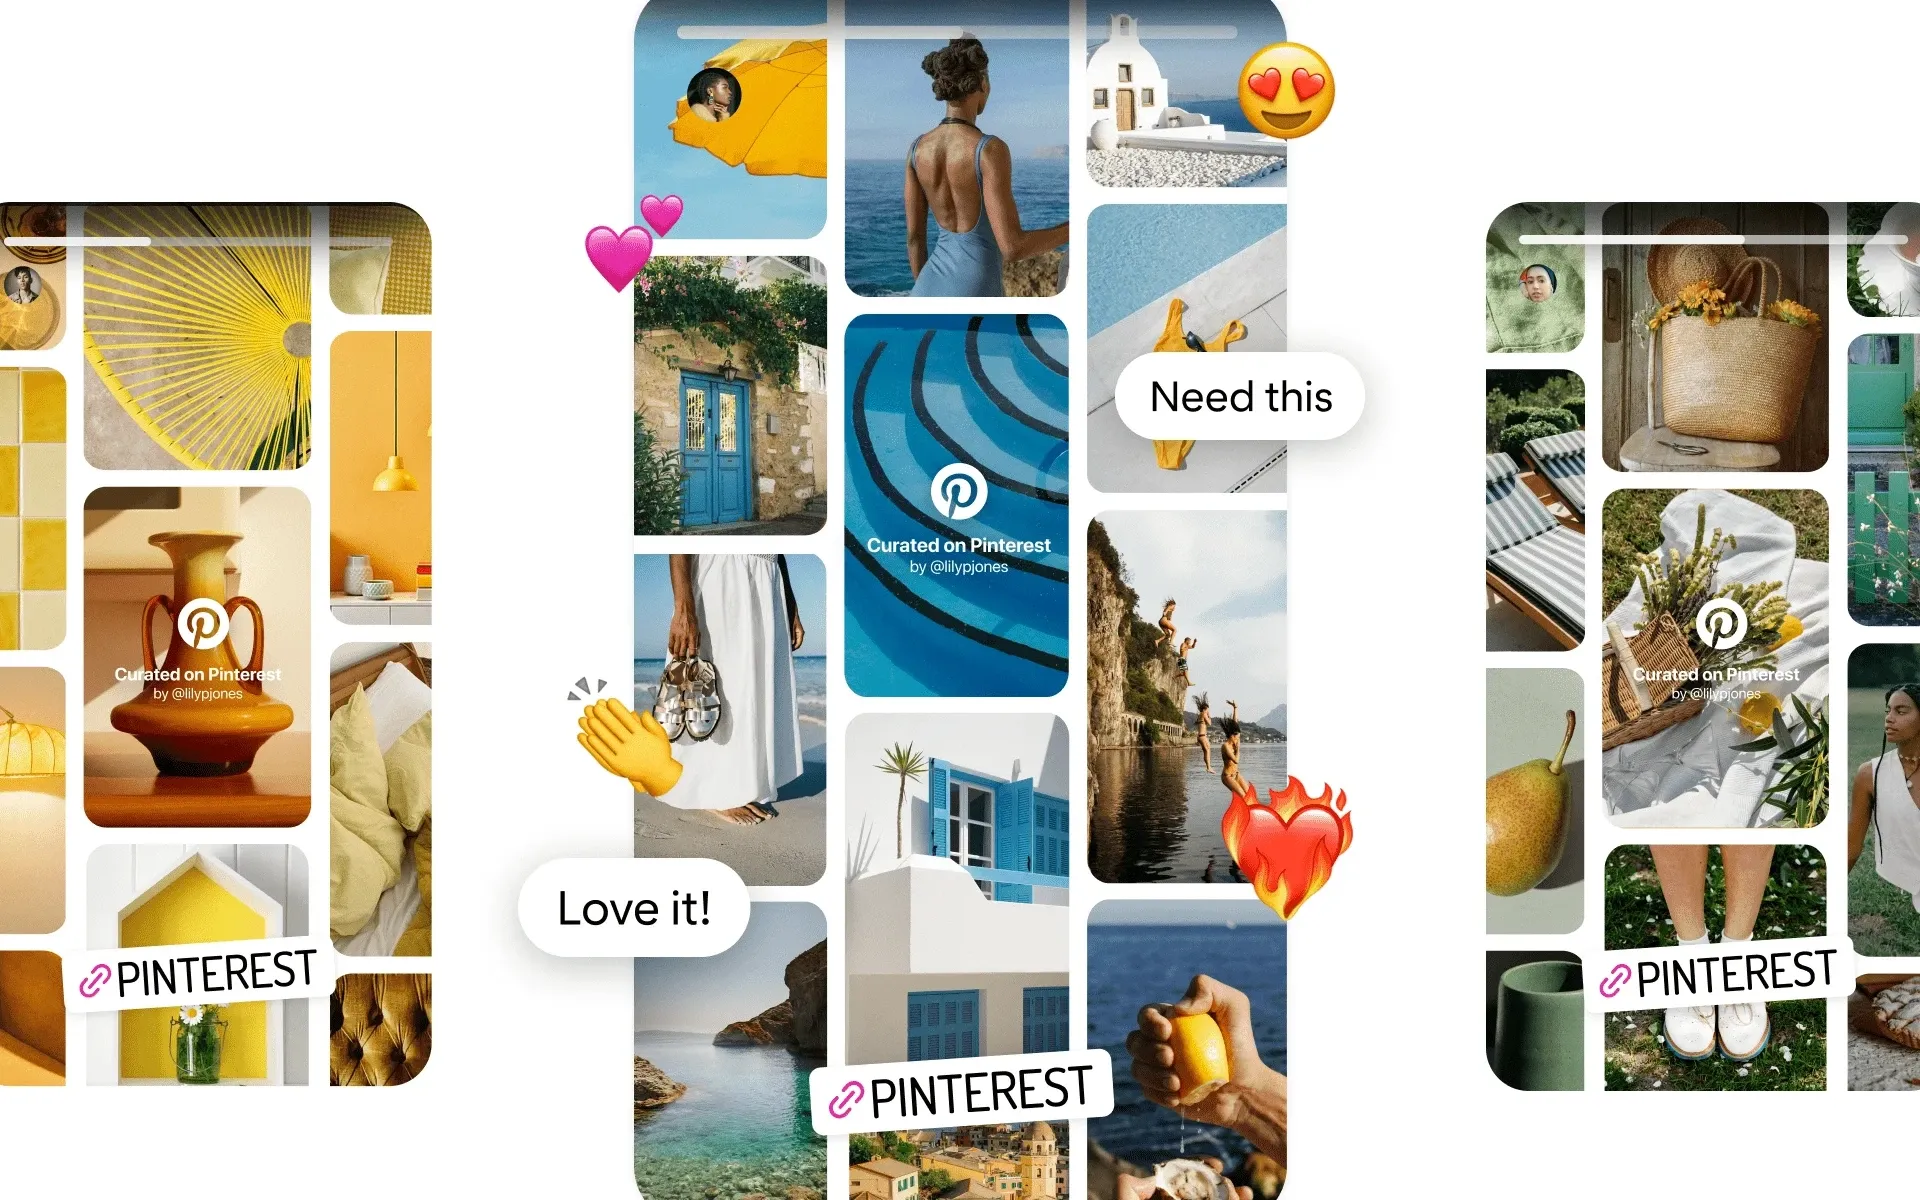 Pinterest unveils a new feature to Share Boards as engaging videos on social media